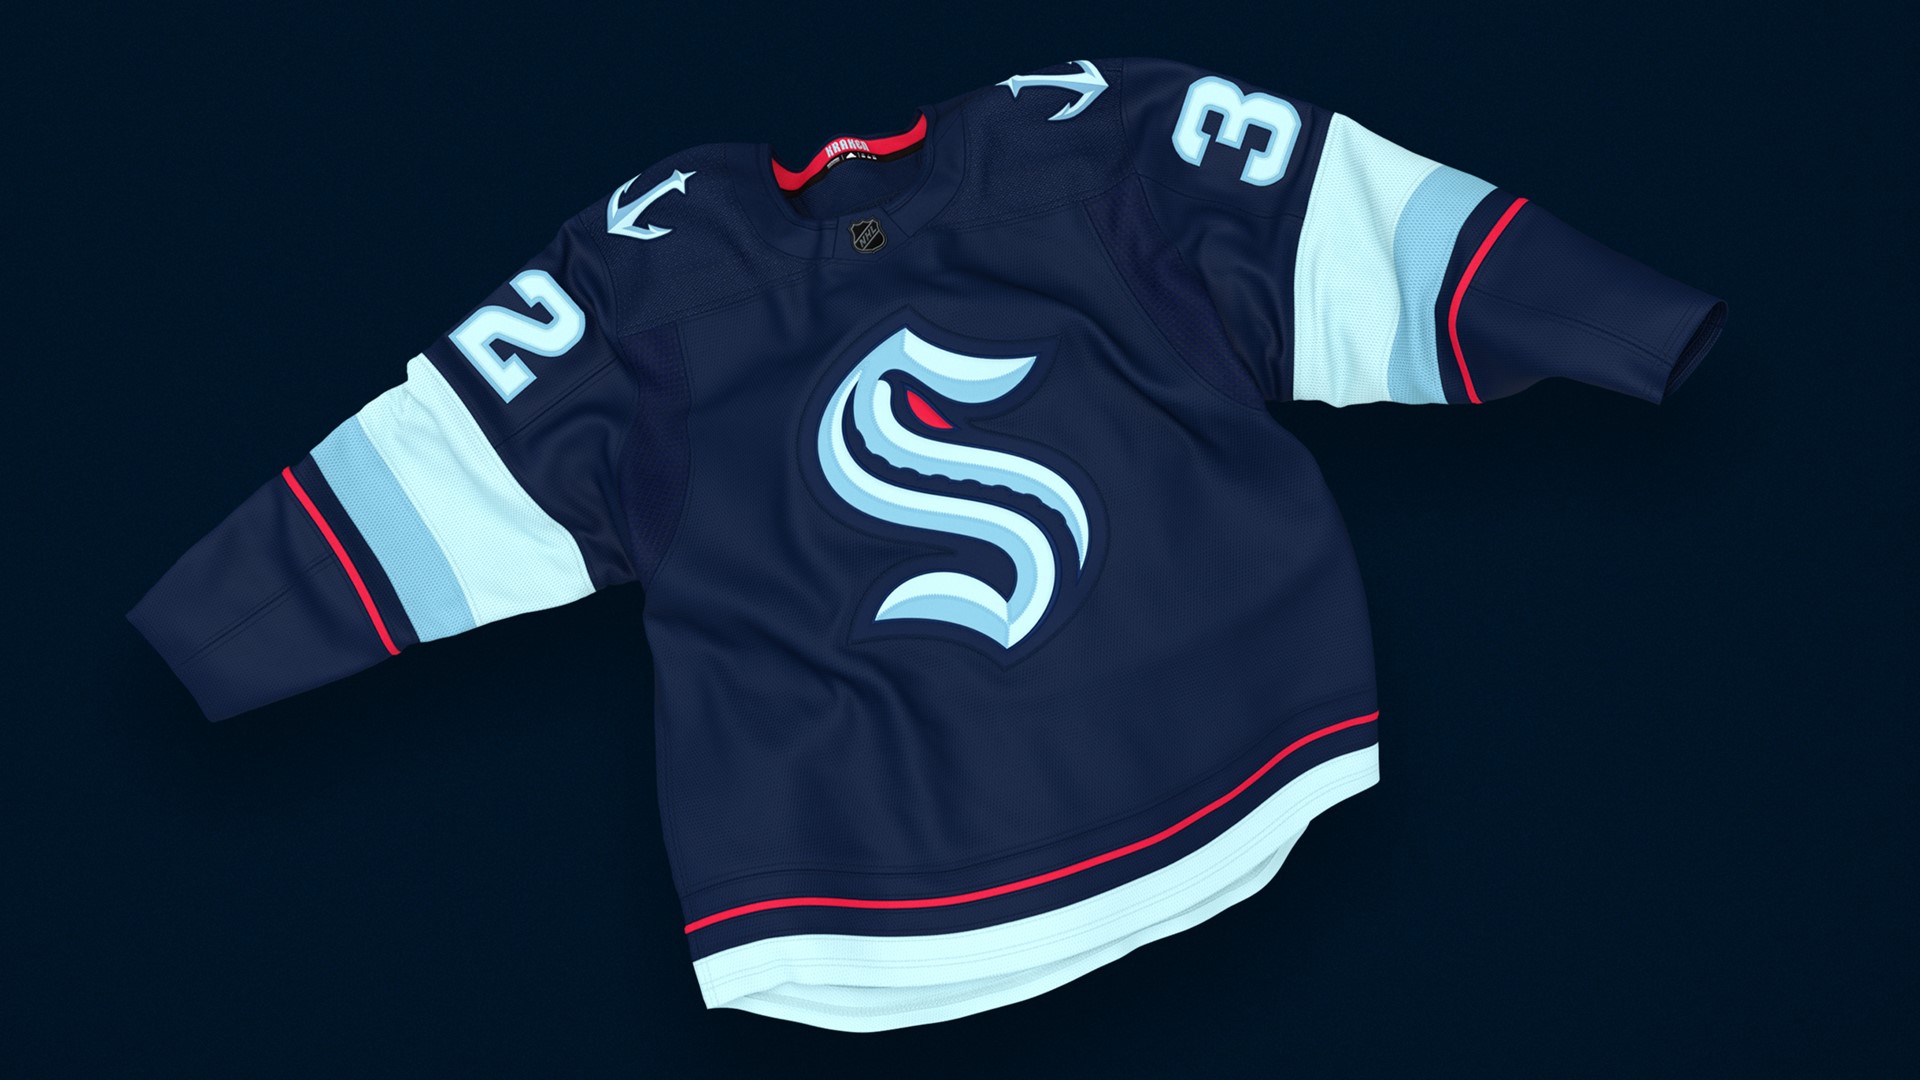 The 32nd NHL franchise will be called the Seattle Kraken, team owners announced Thursday morning.